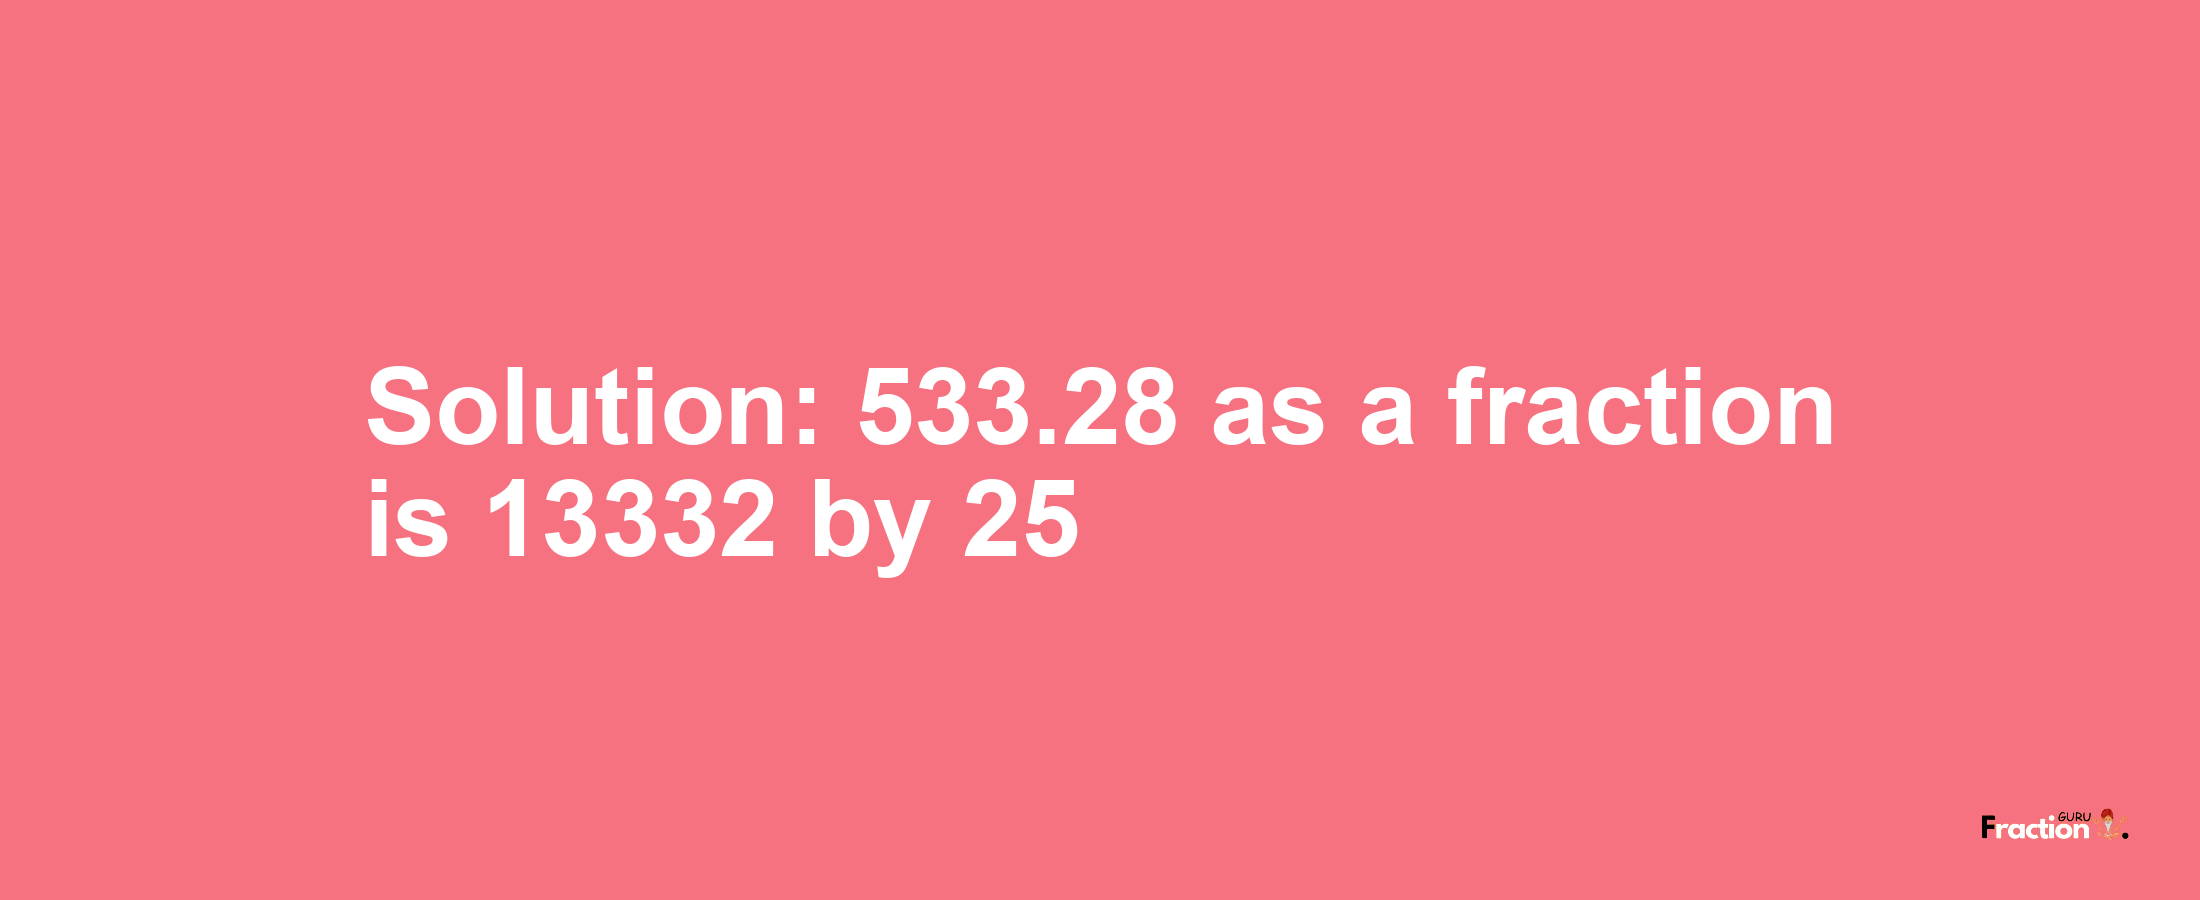 Solution:533.28 as a fraction is 13332/25